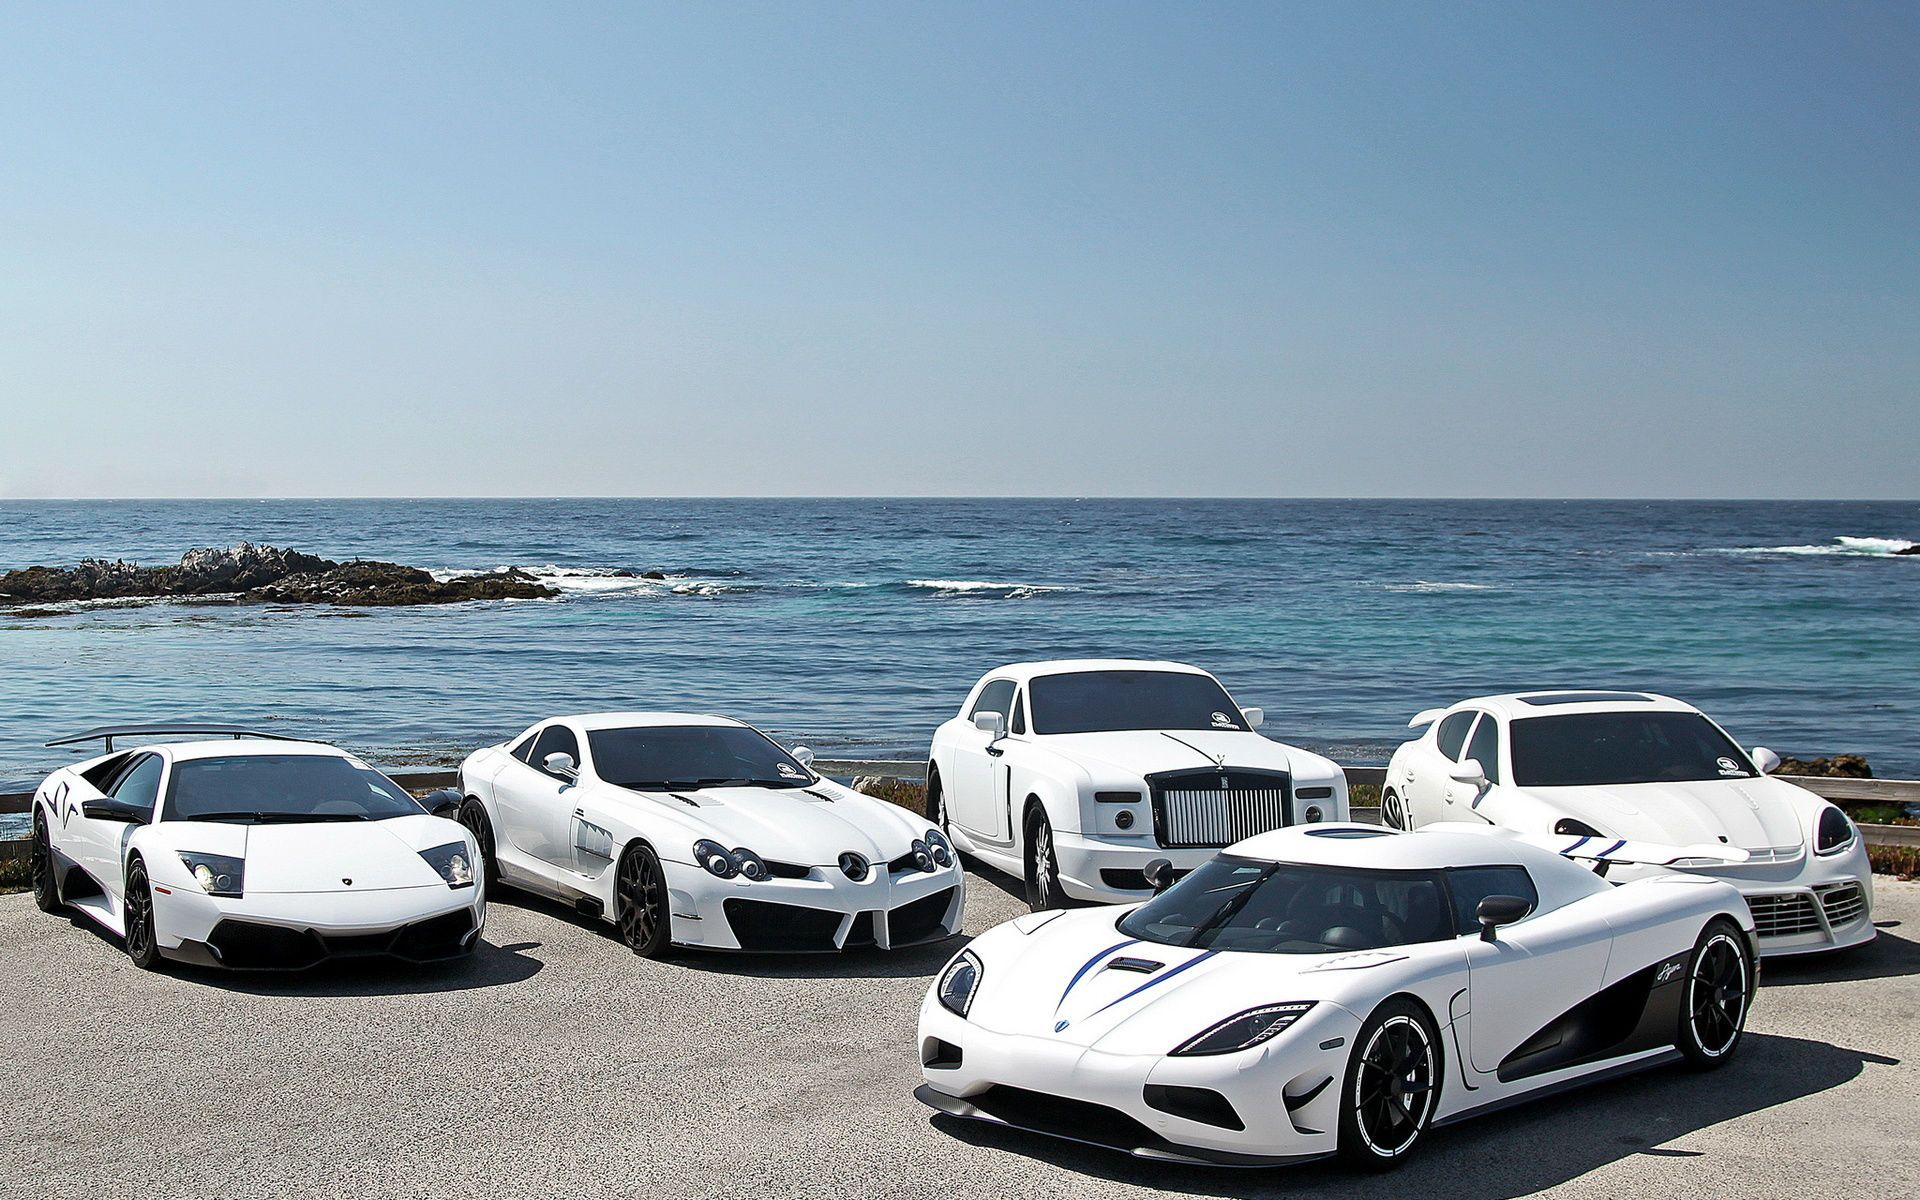 Supercars Hd Wallpapers - Wallpapers High Definition